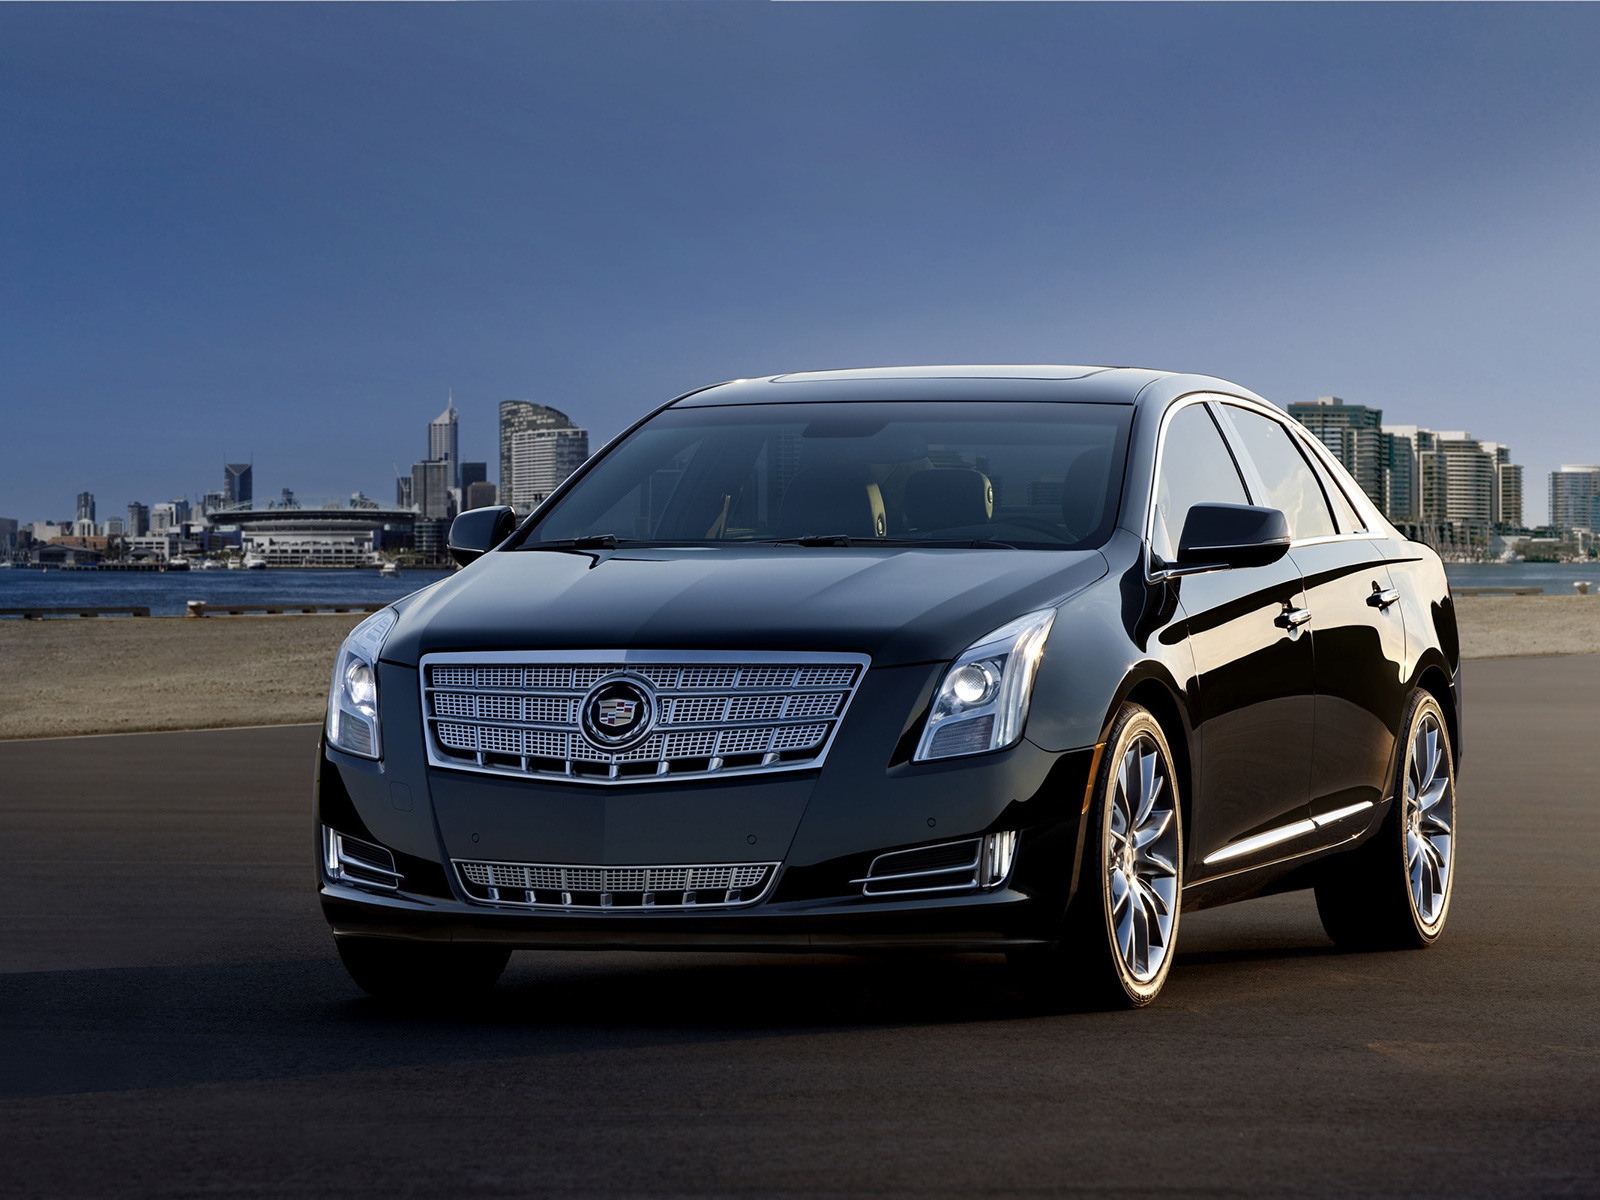 Cadillac XTS 2013 Edition for 1600 x 1200 resolution